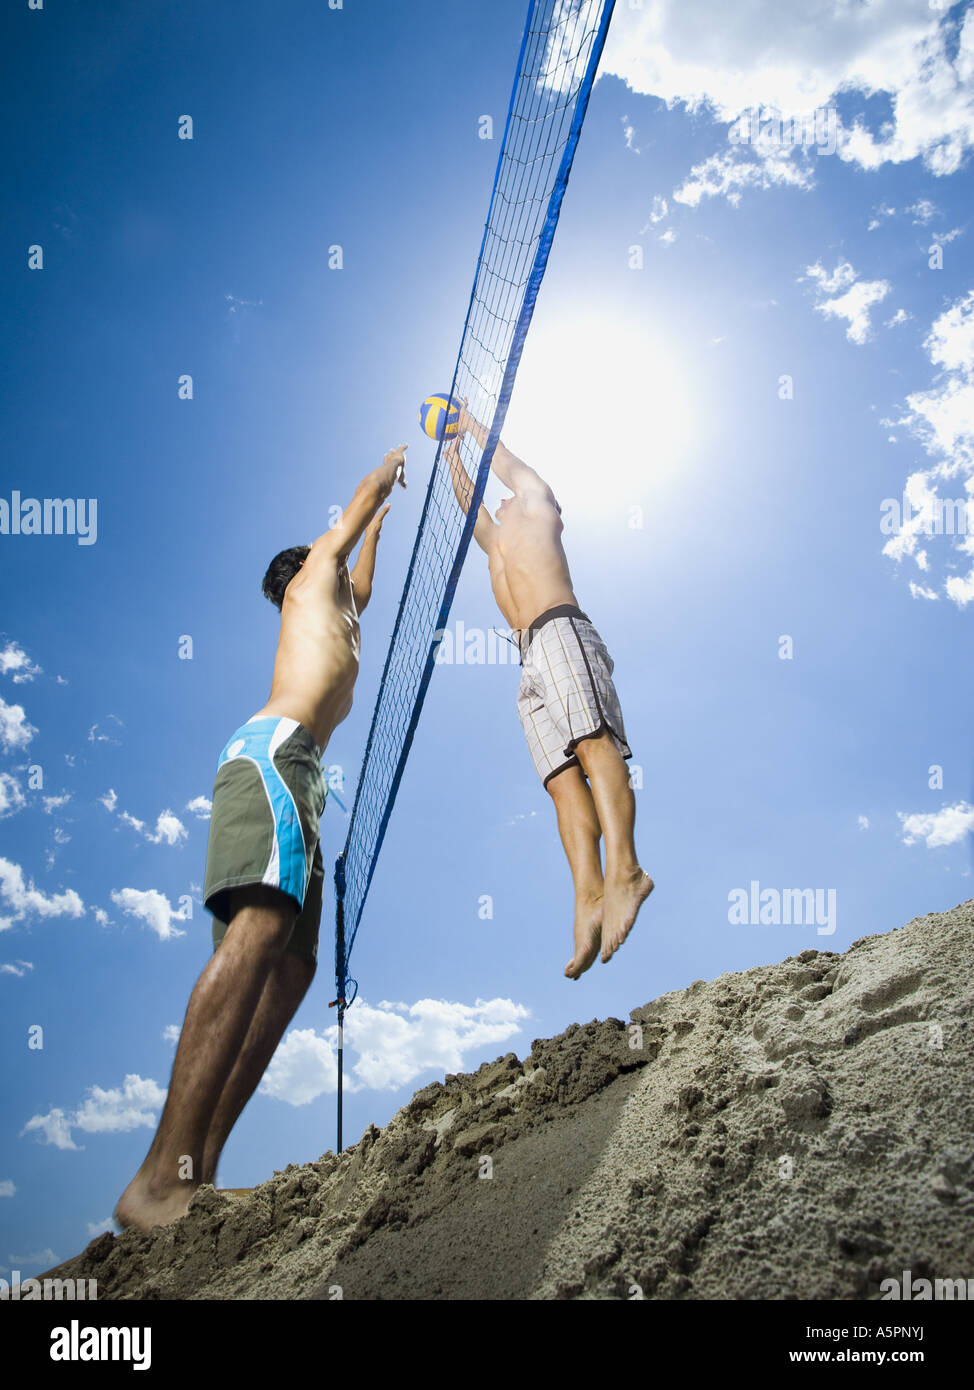 Jumping volleyball players Stock Photo - Alamy